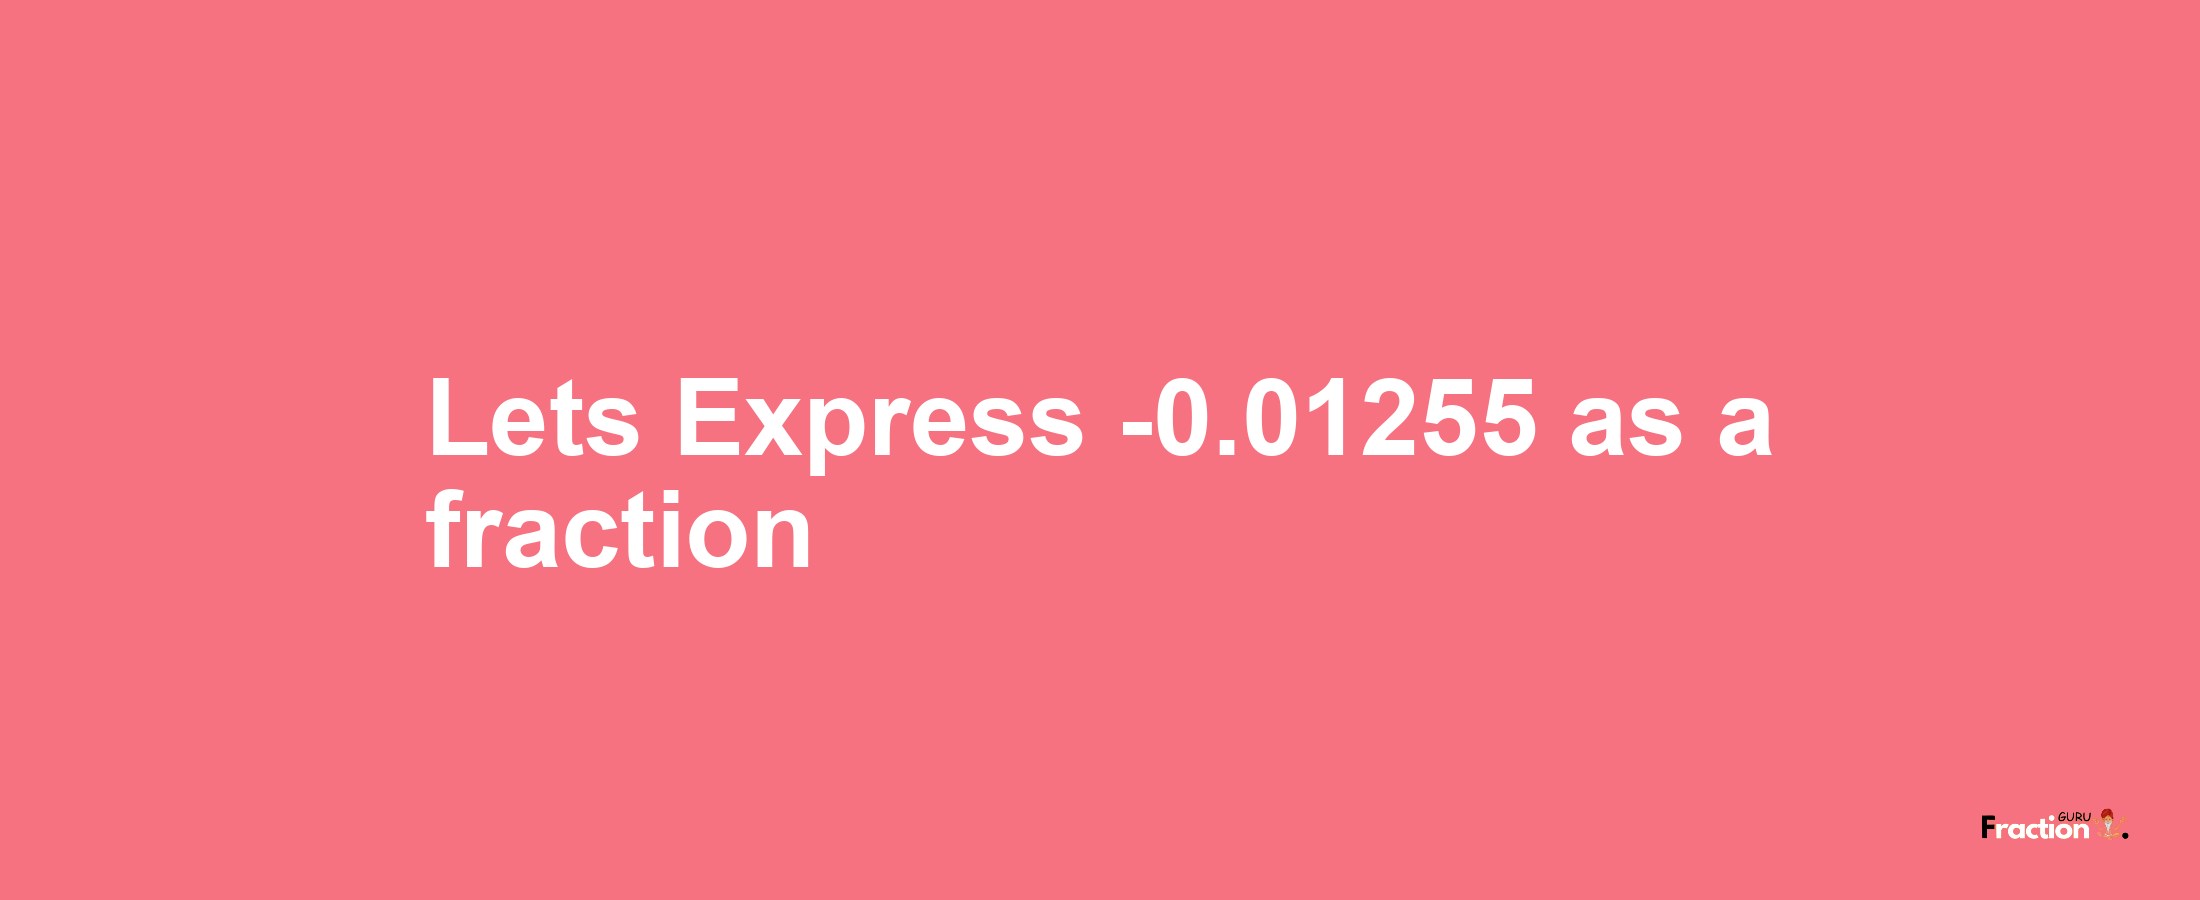 Lets Express -0.01255 as afraction